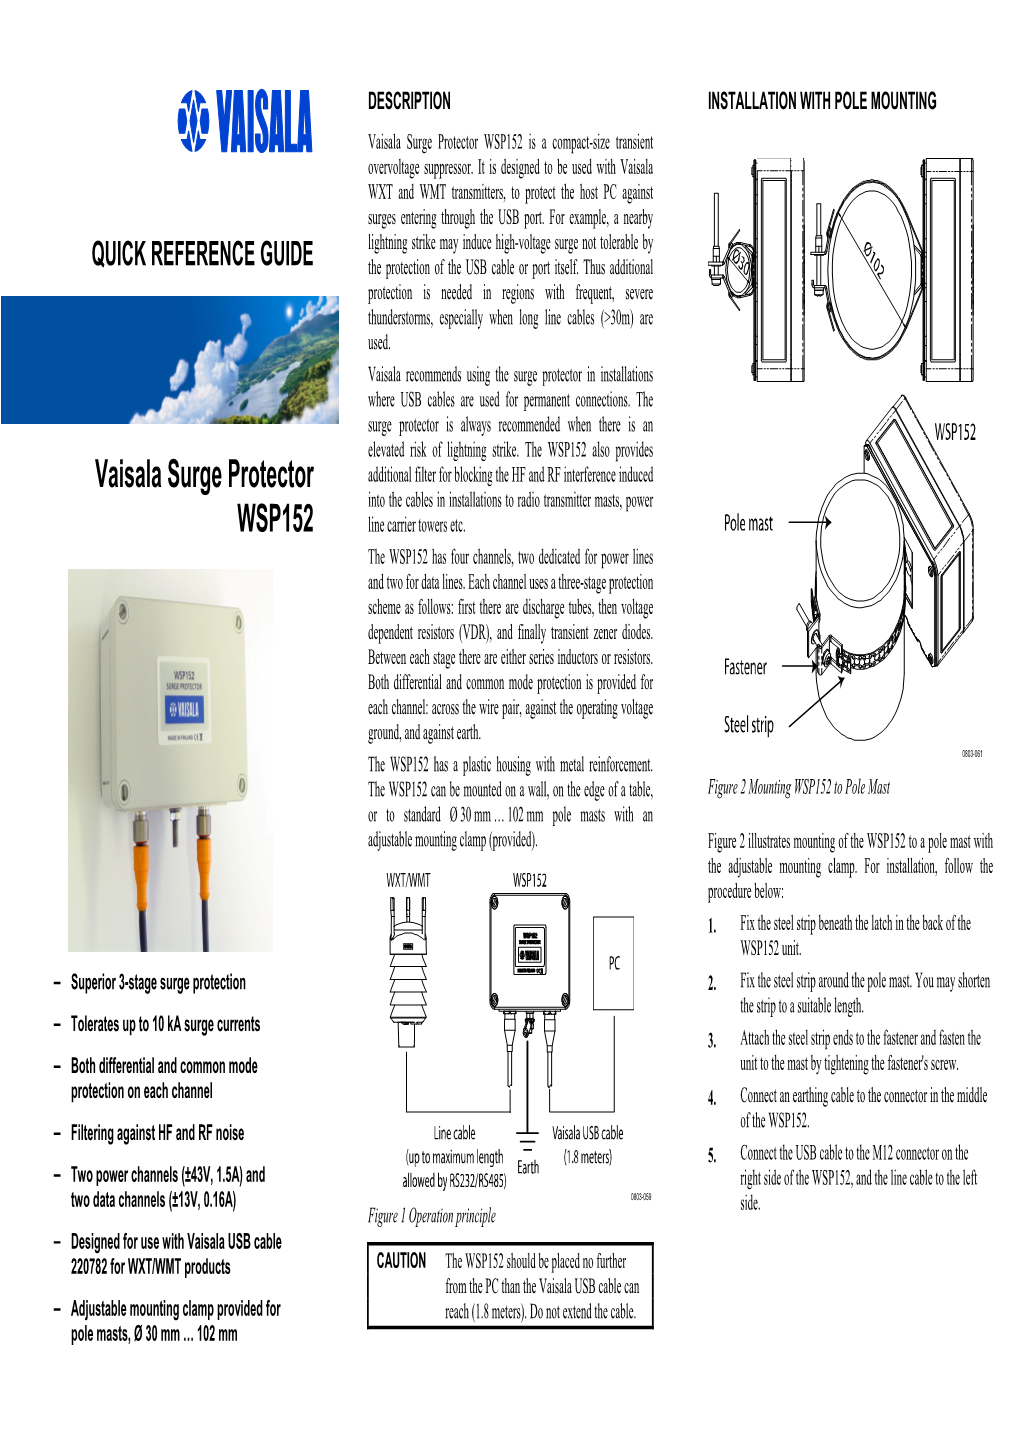 Vaisala Surge Protector WSP152 Is a Compact-Size Transient Overvoltage Suppressor